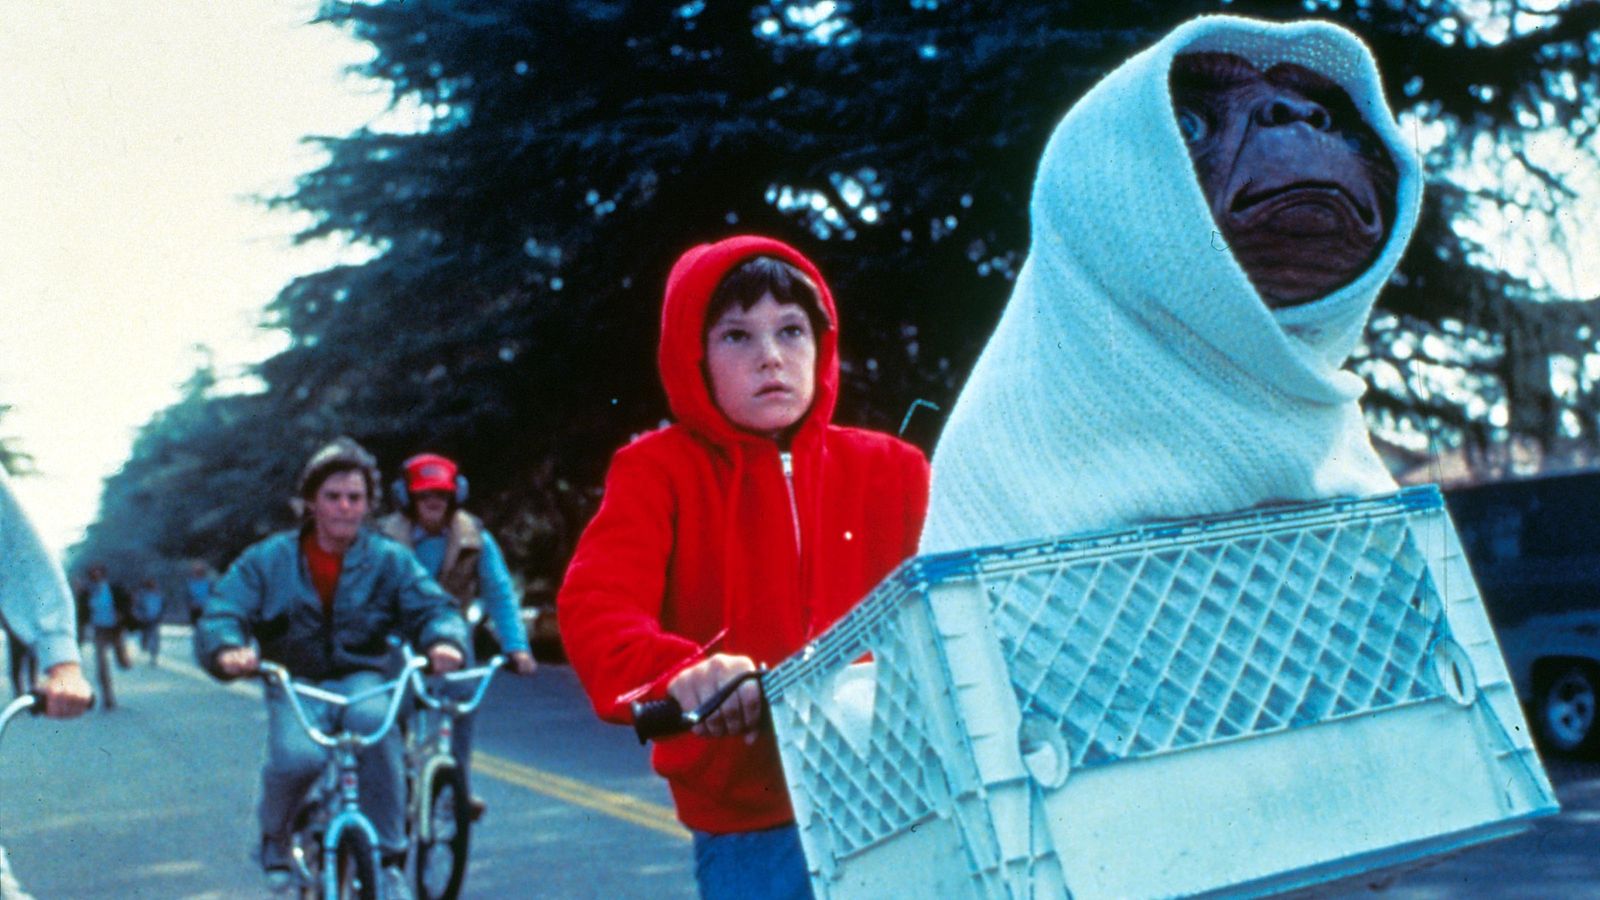 Steven Spielberg says he regrets editing guns out of E.T. re-release